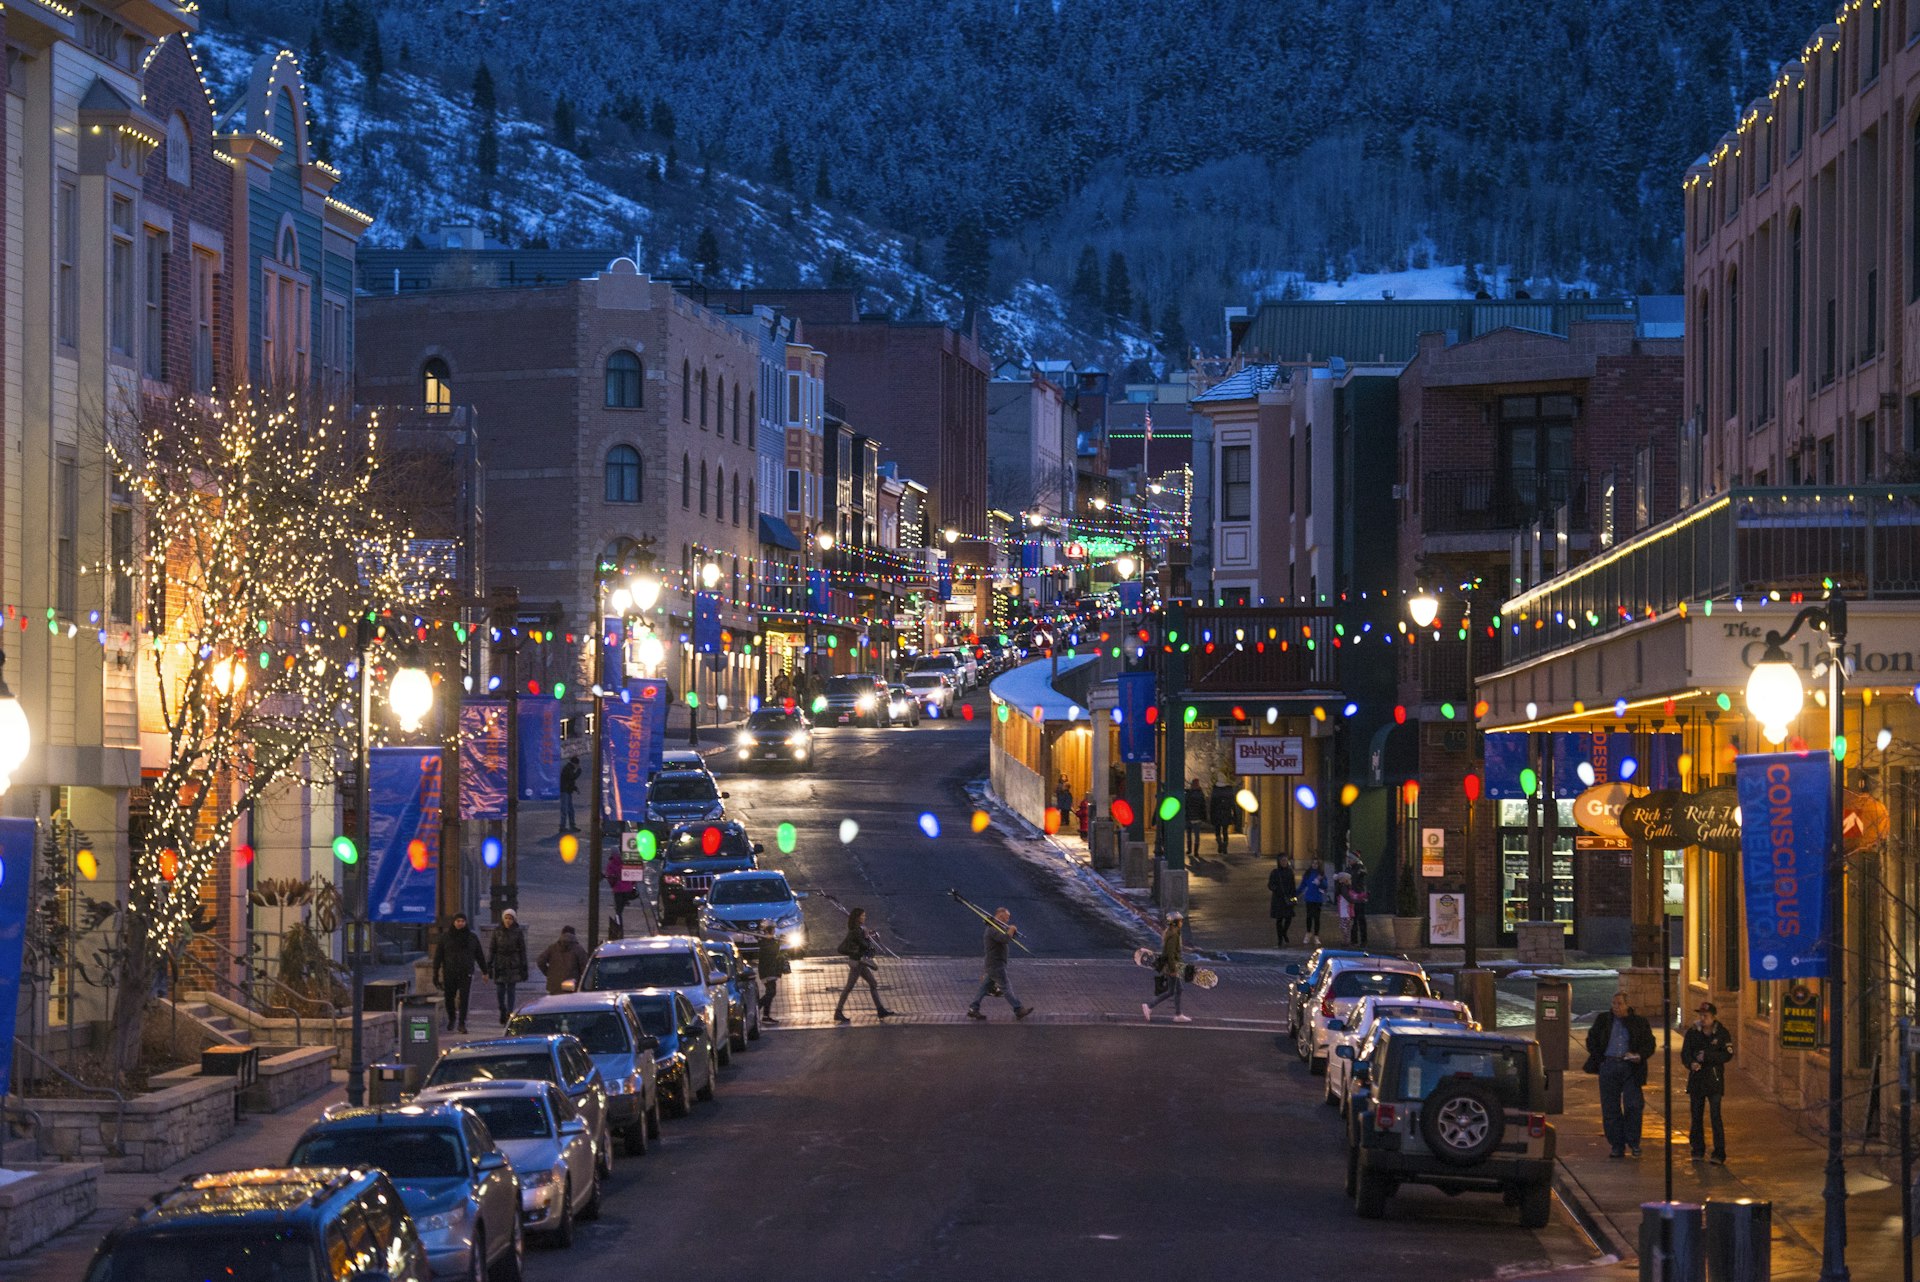 Skiers and a snowboarder cross a festively lit and decorated Main Street in Park City at night.